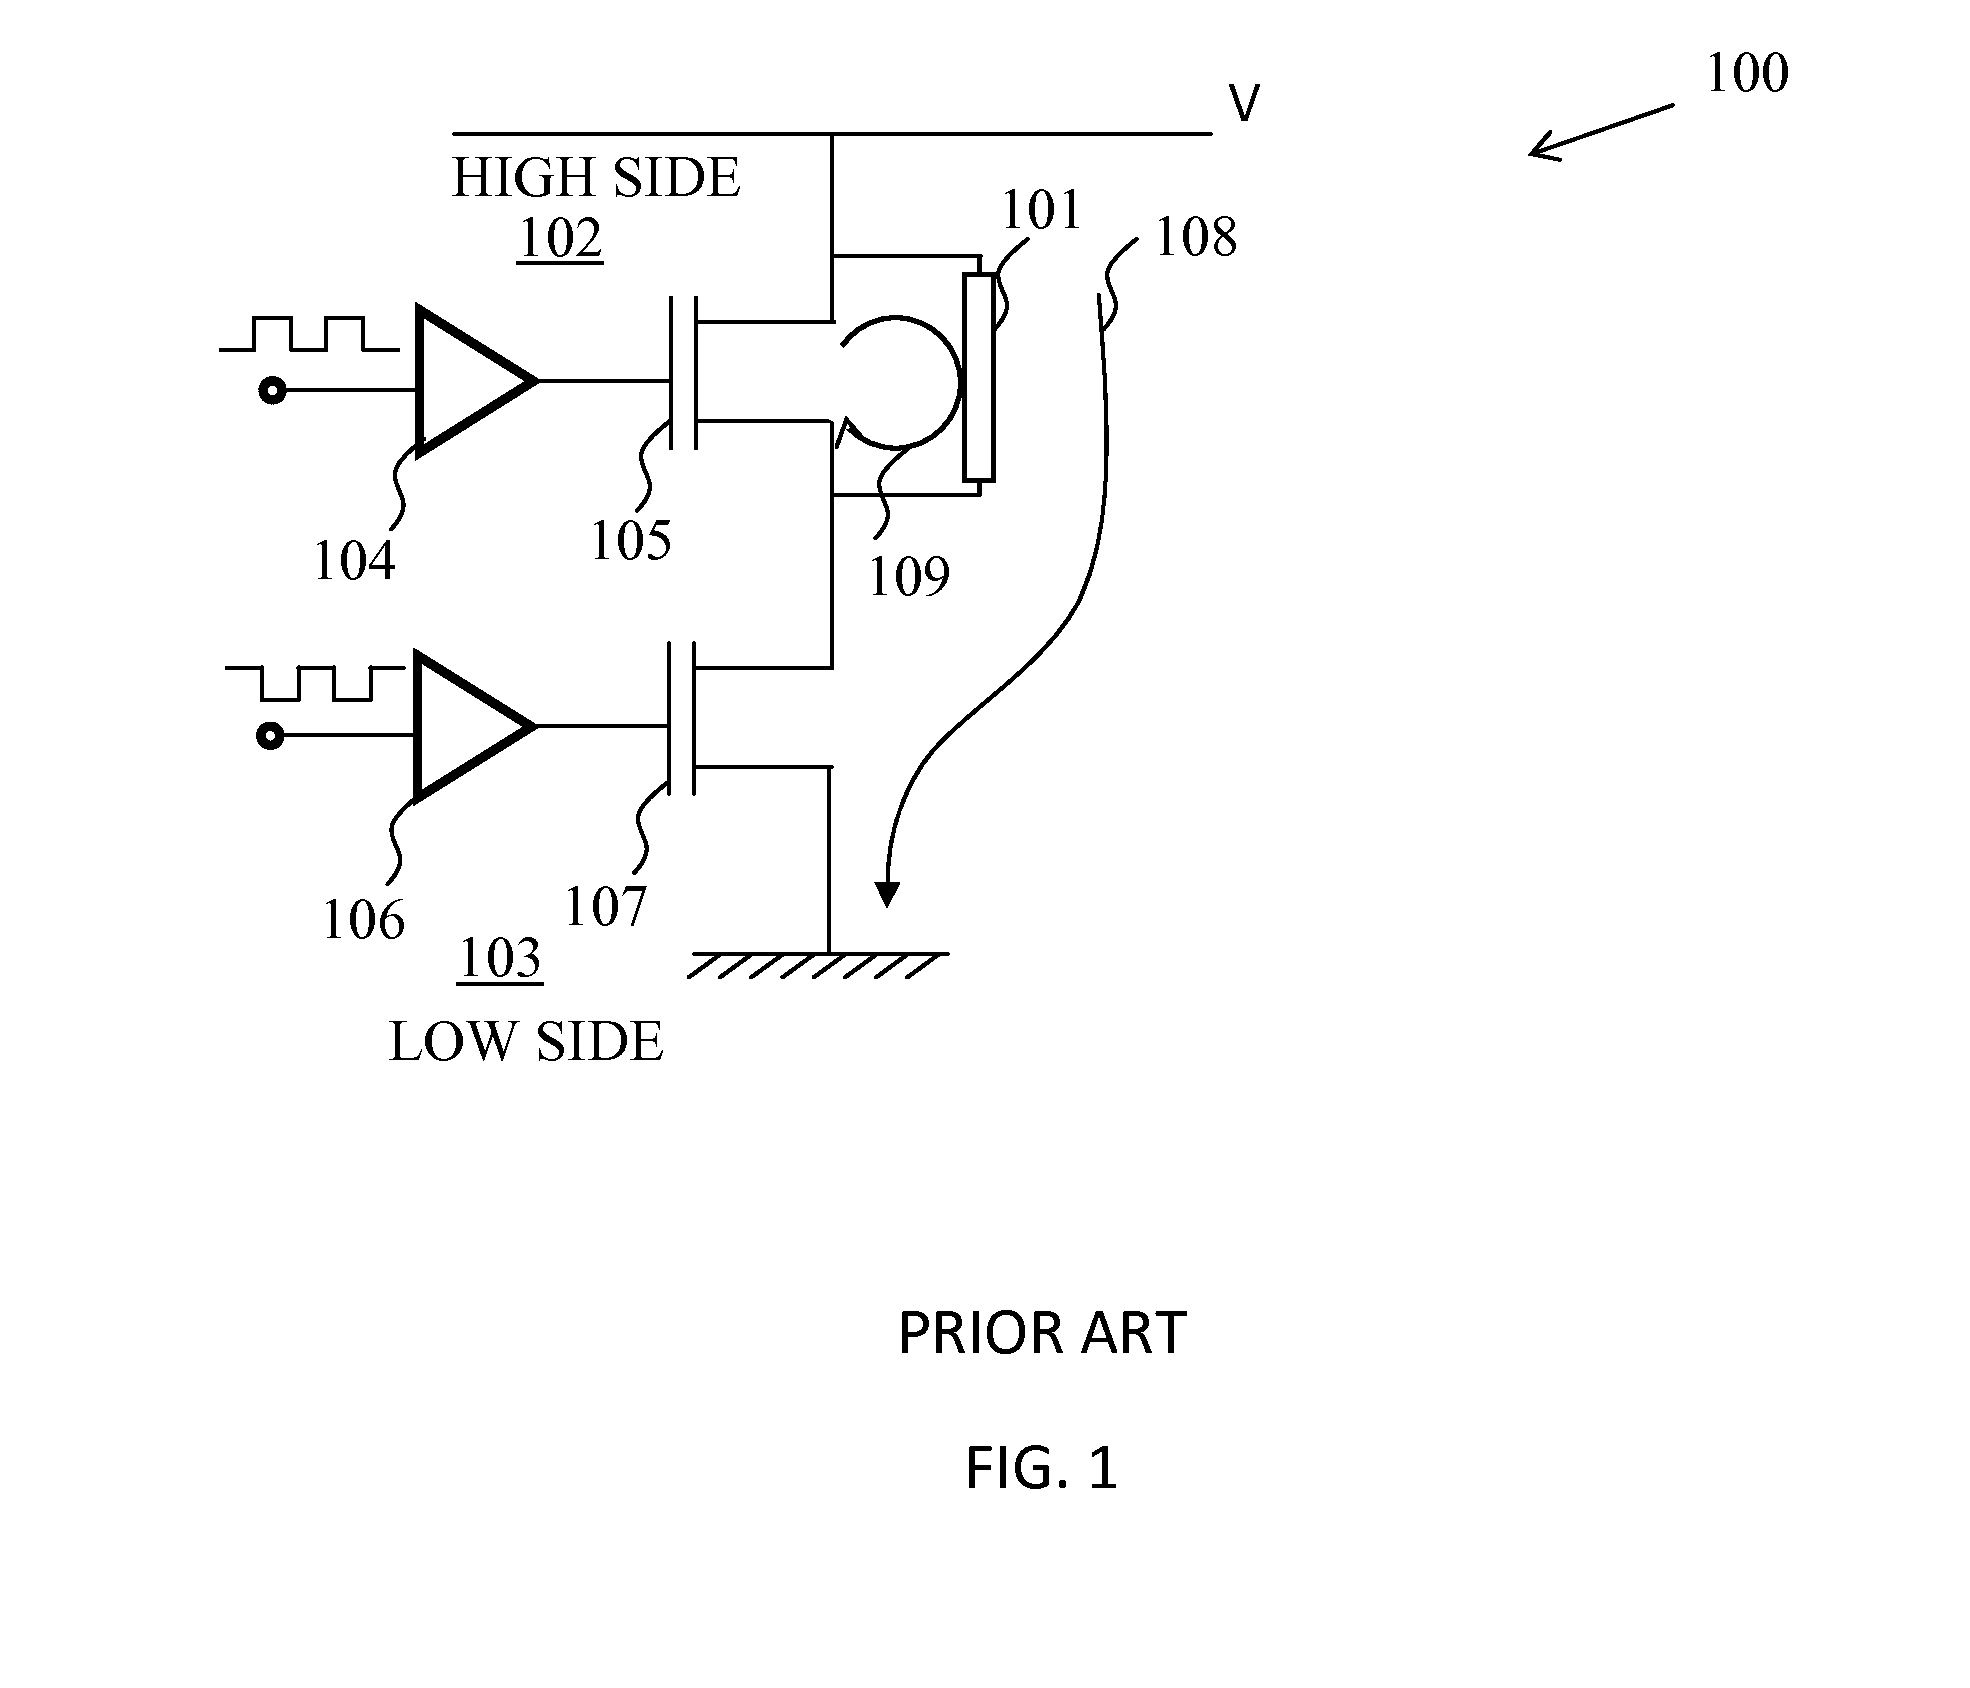 An inductive load control circuit, a braking system for a vehicle and a method of measuring current in an inductive load control circuit